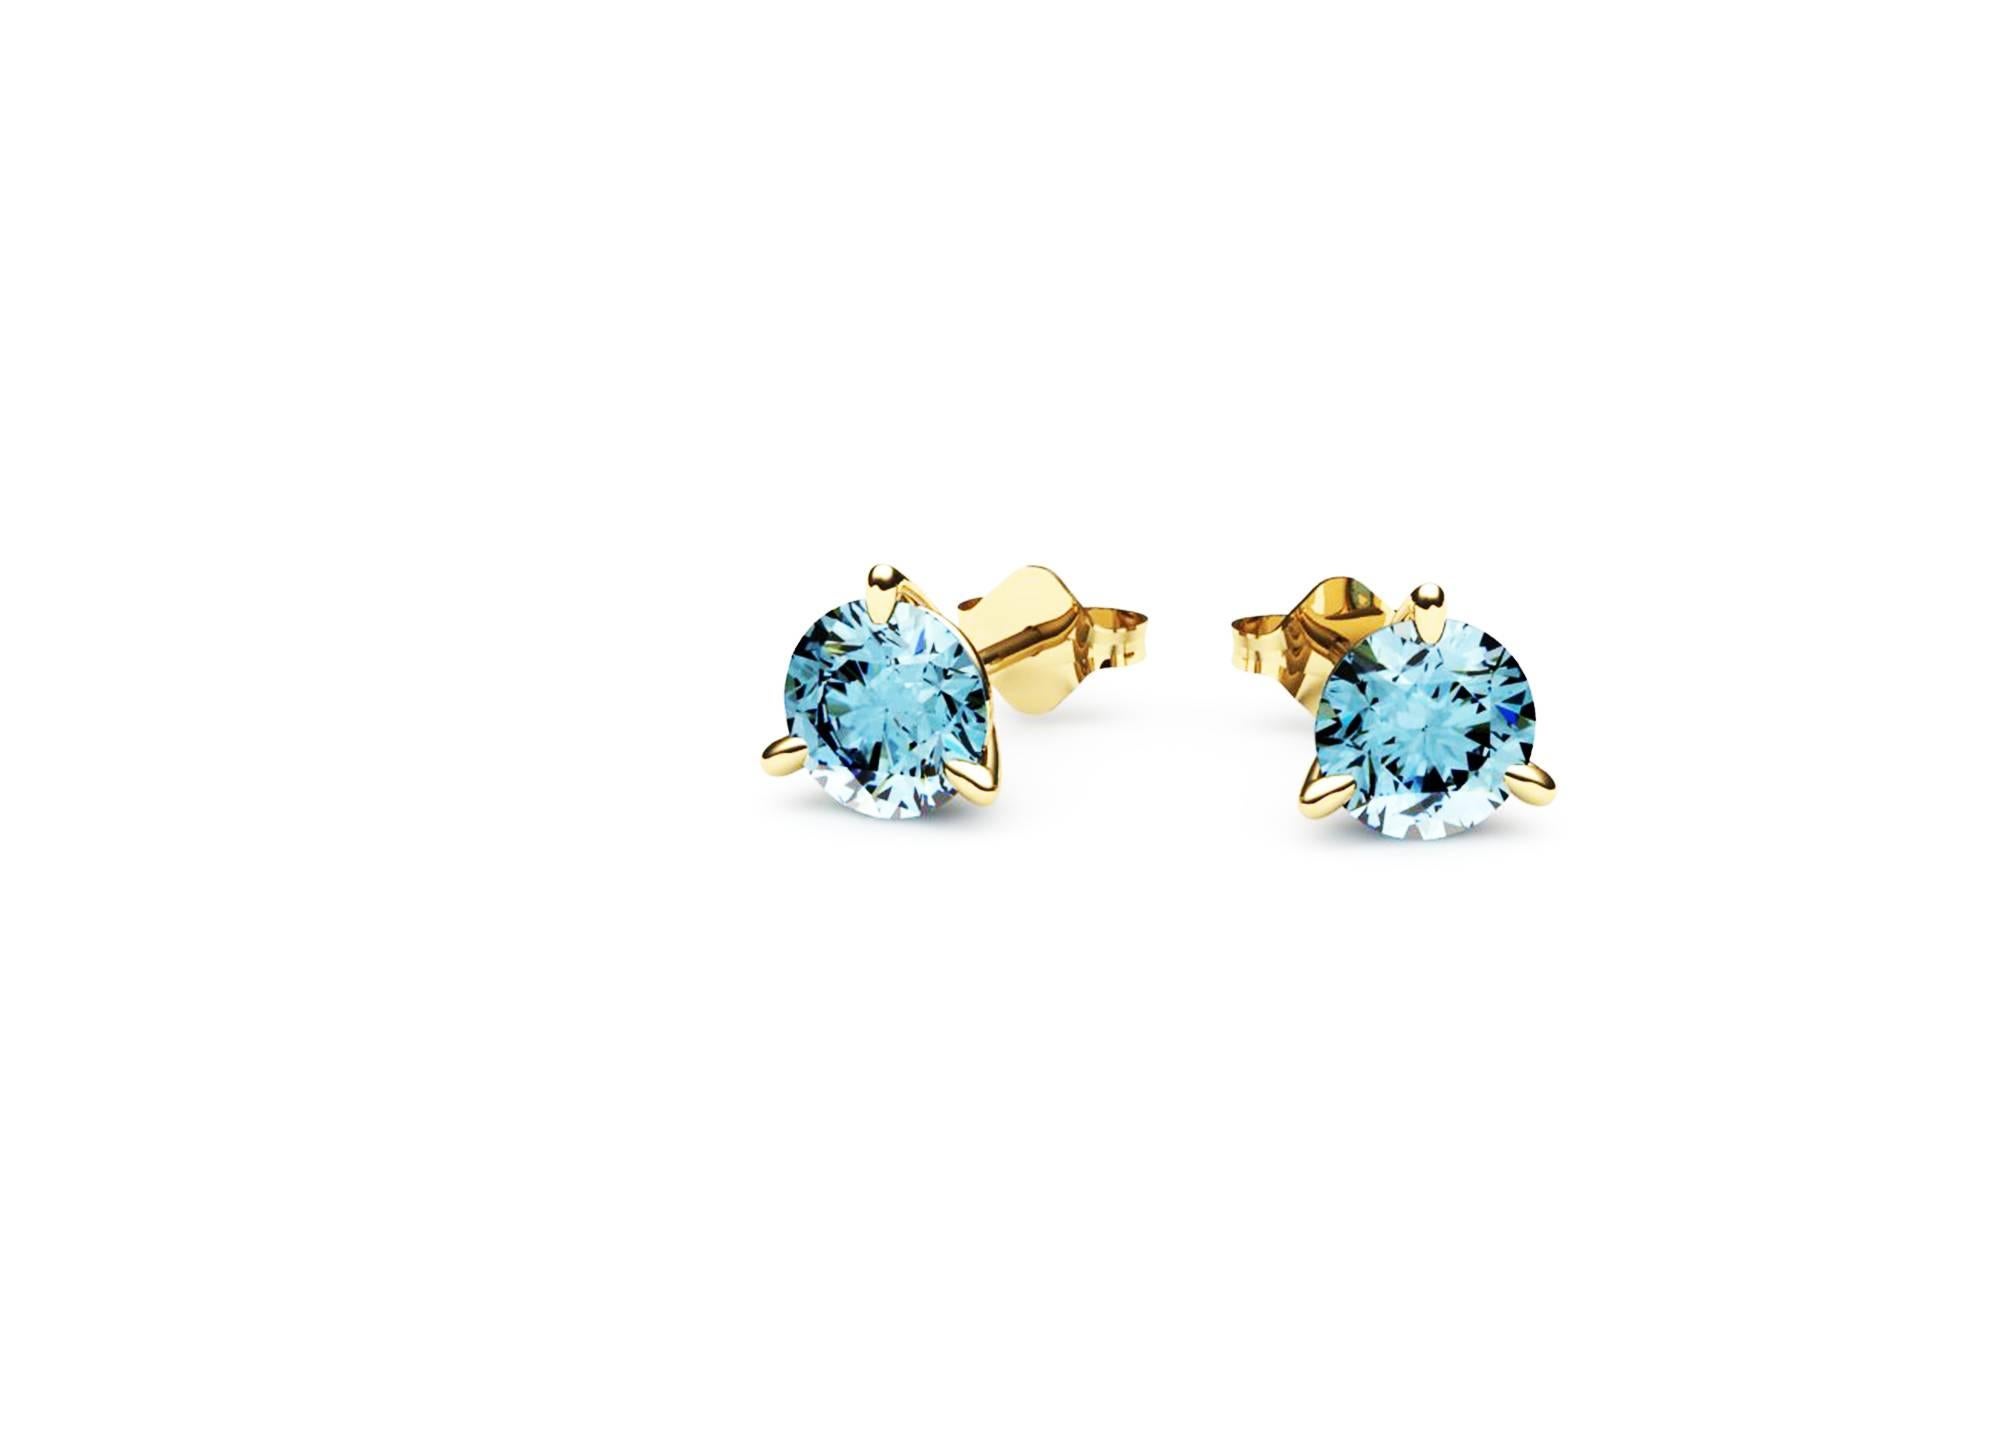 Ferrucci natural round Aquamarine ear-studs, for an approximately 2.02 carats, hand made in 18k yellow gold by Italian master jeweler Francesco Ferrucci in New York City.

Perfect gift for any woman and every age, easy to wear from office to evening